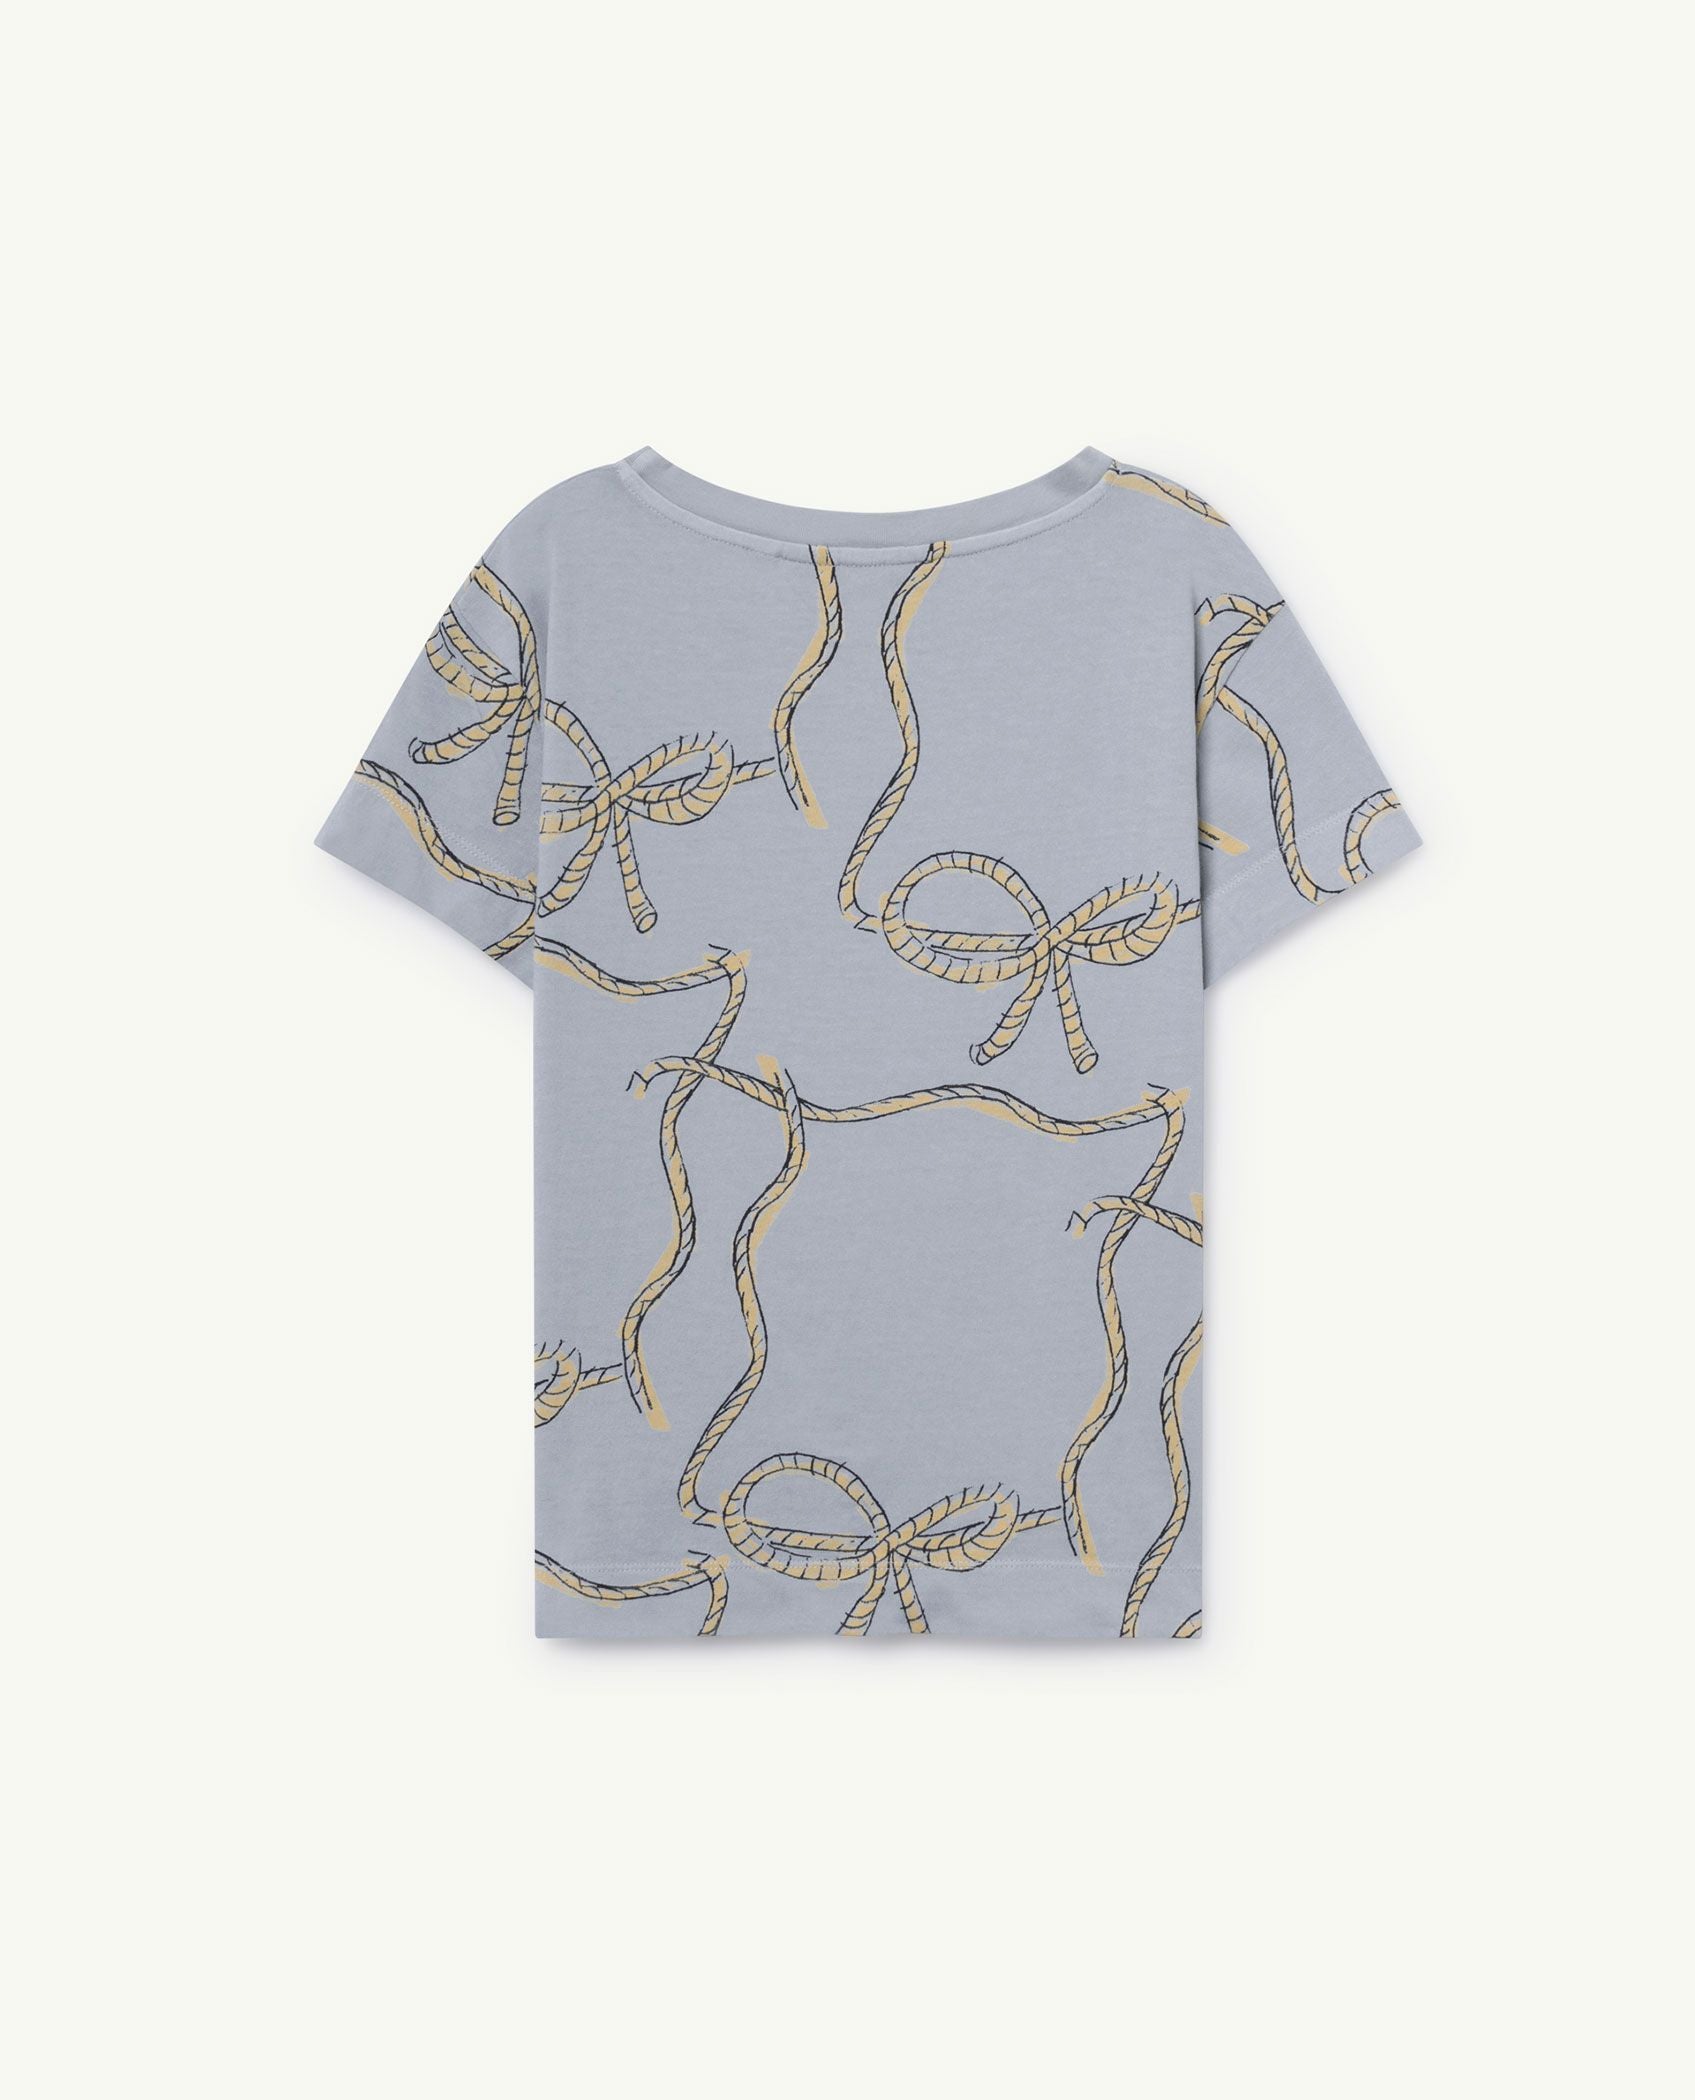 ROOSTER KIDS T-SHIRT, Portugal BLUE ROPES - Cemarose Children's Fashion Boutique